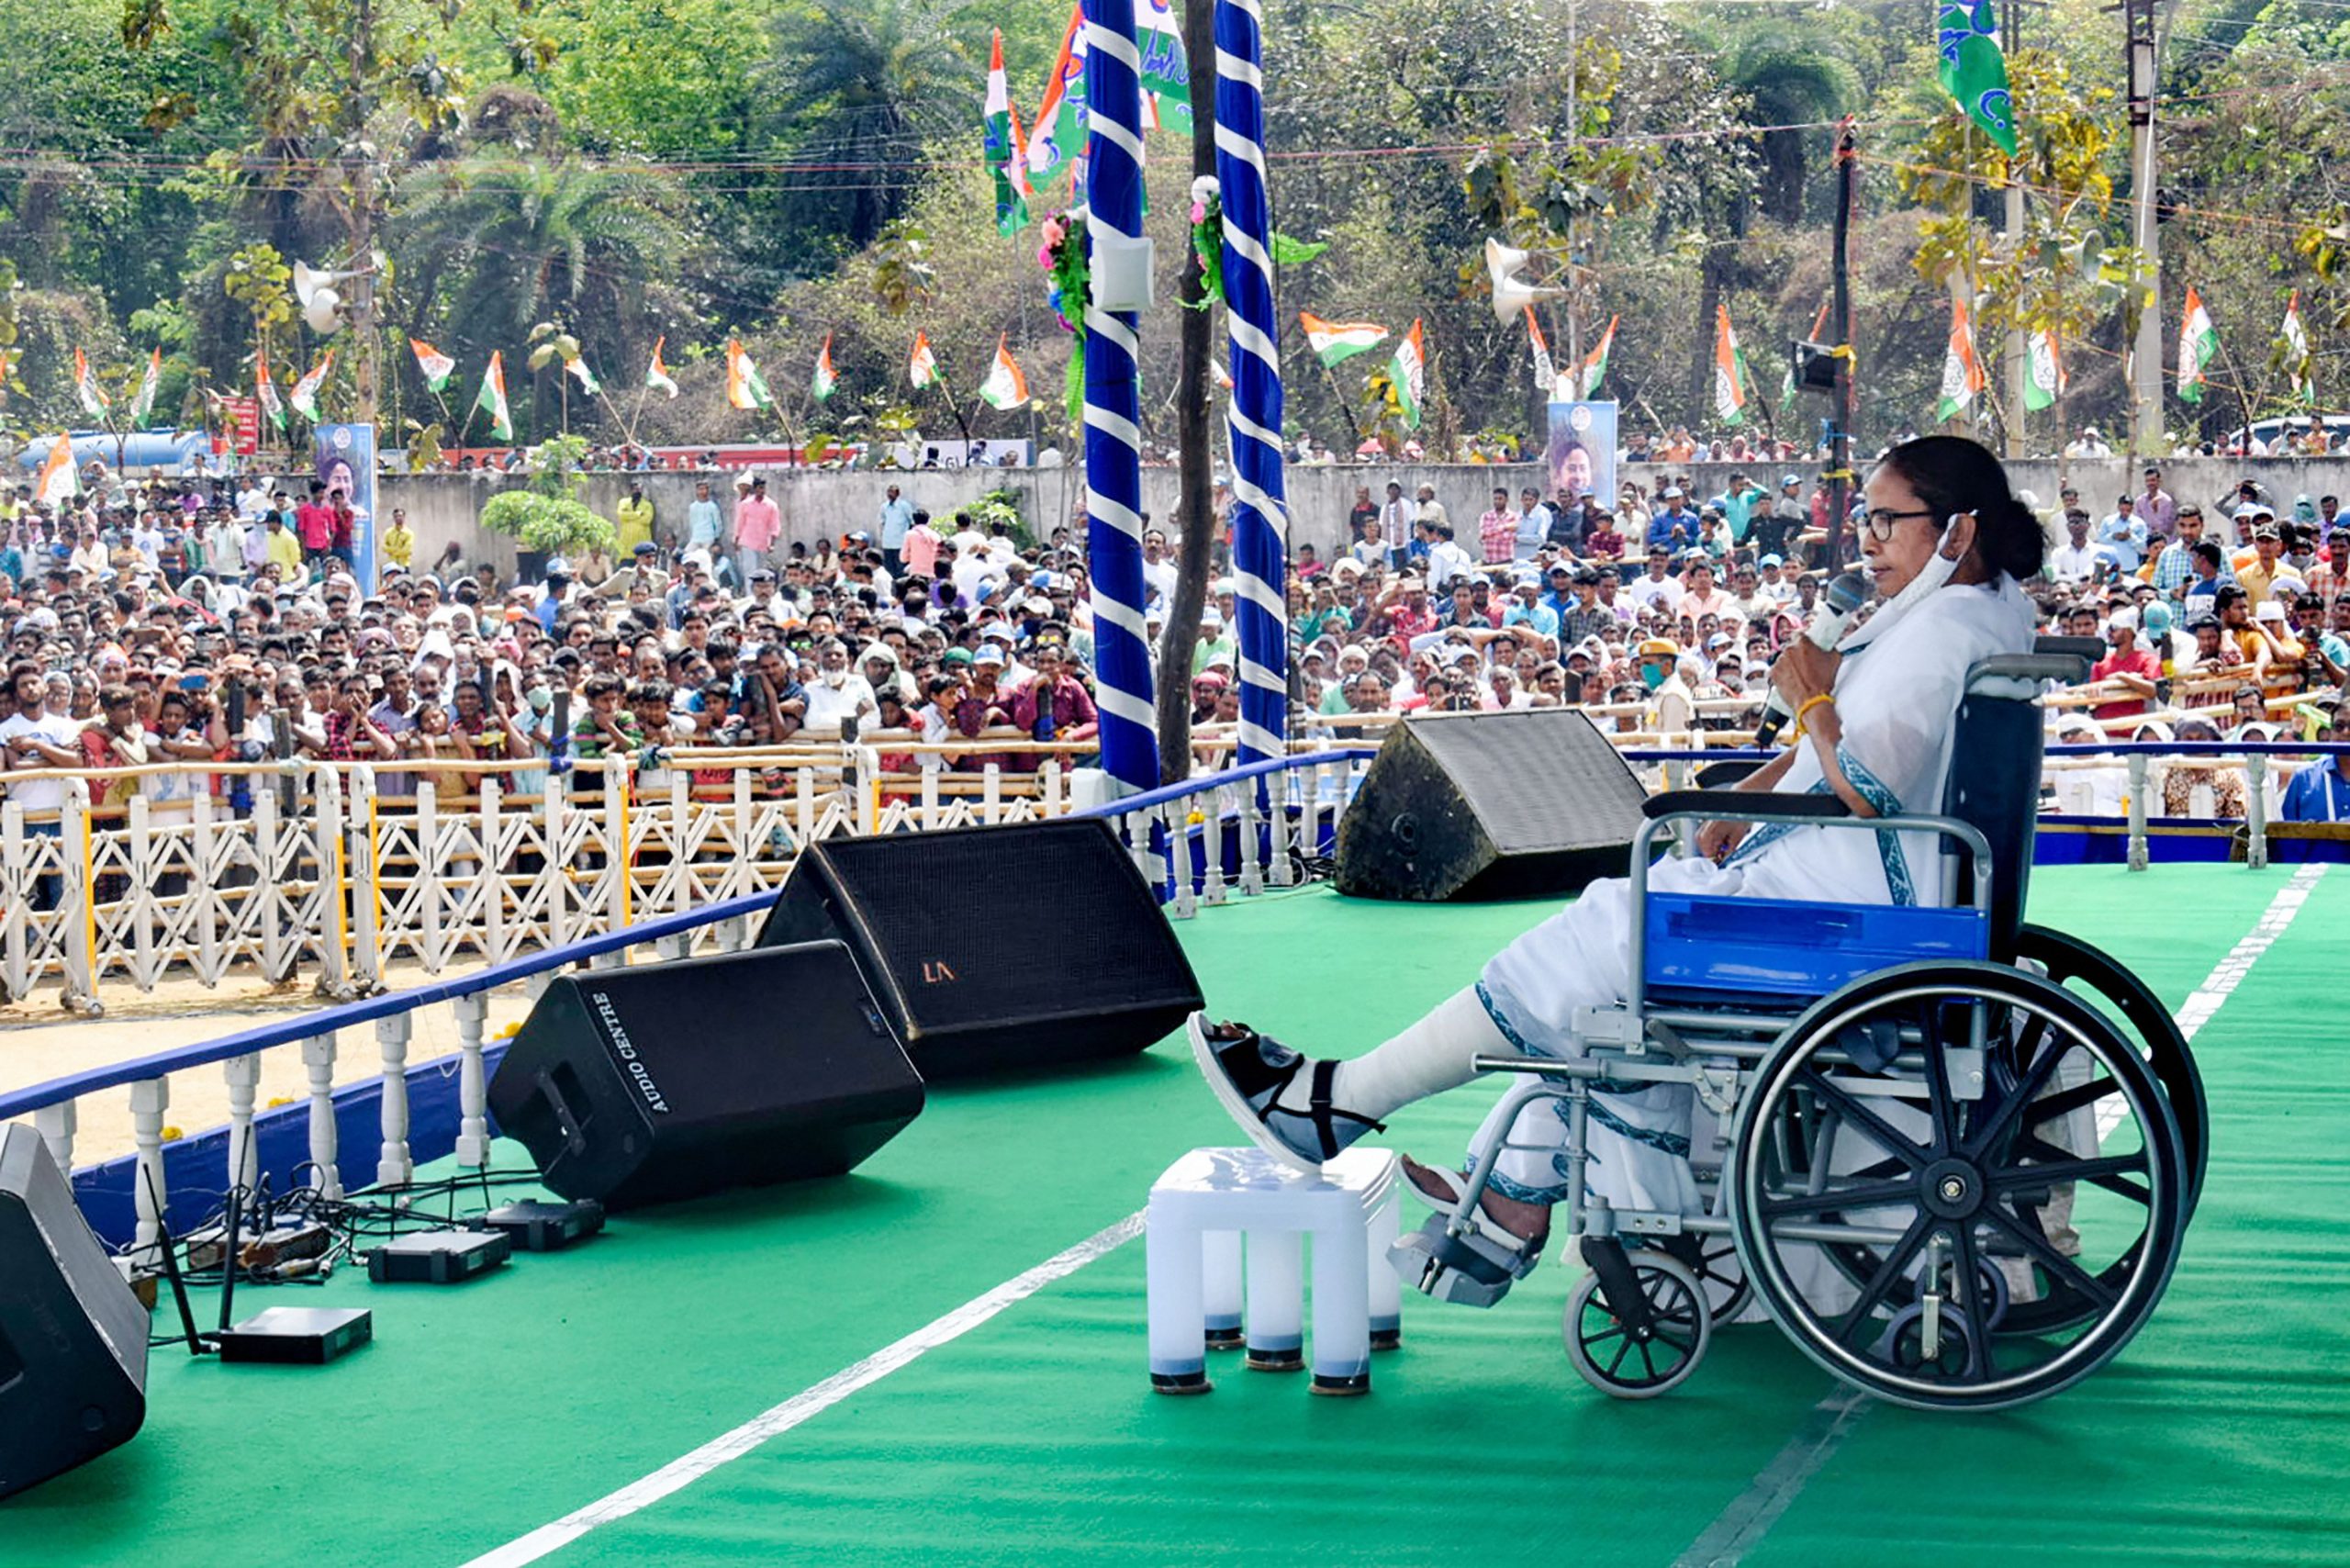 From dance on car to khela hobe on wheelchair: Mamata Banerjee is injured but undeterred